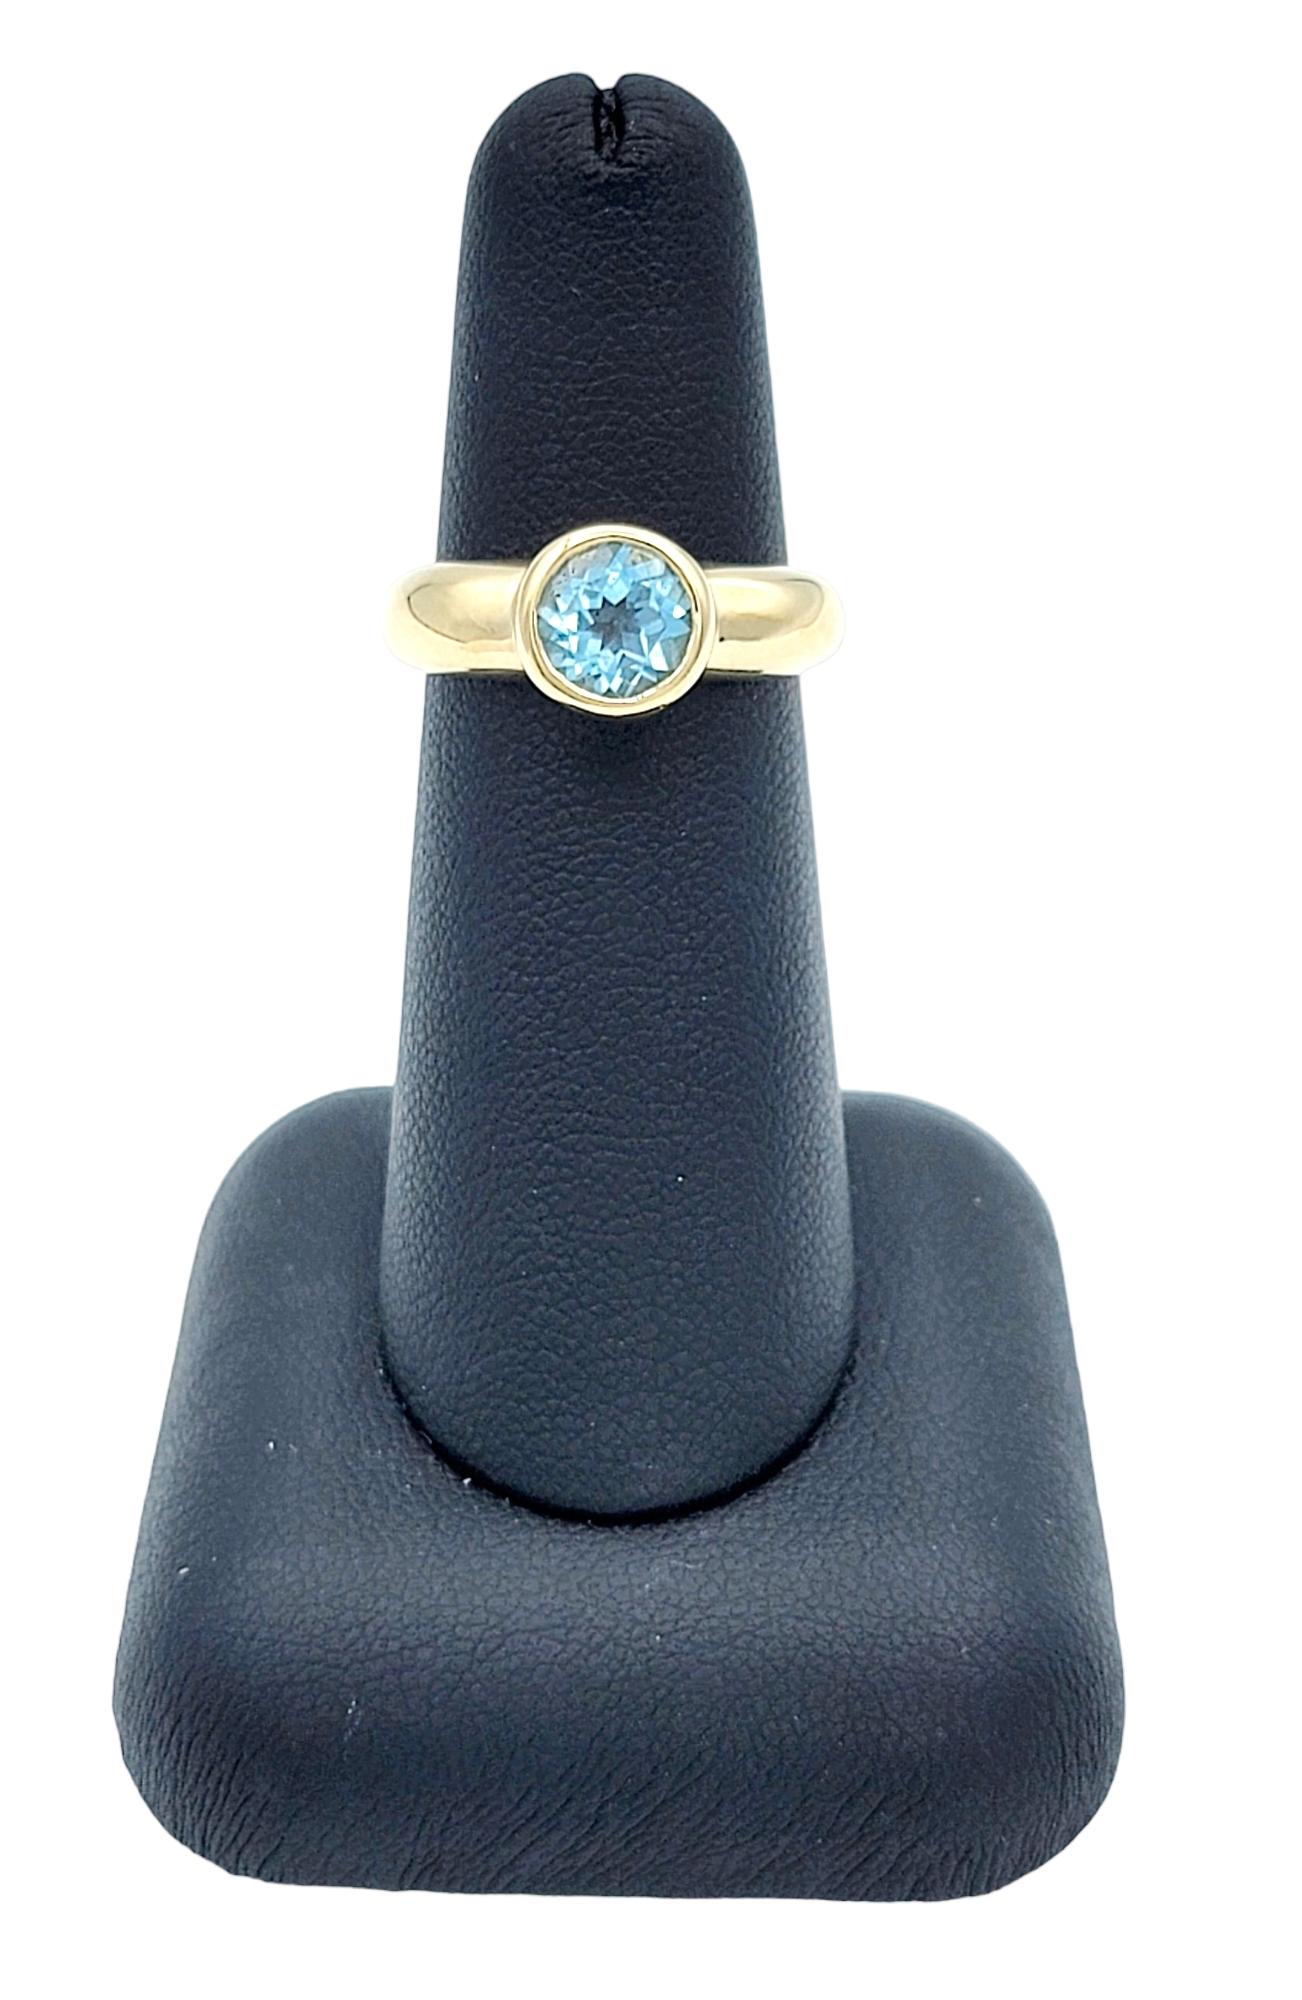 Round Bezel Set Blue Topaz Solitaire Band Ring in Polished 14 Karat Yellow Gold For Sale 2